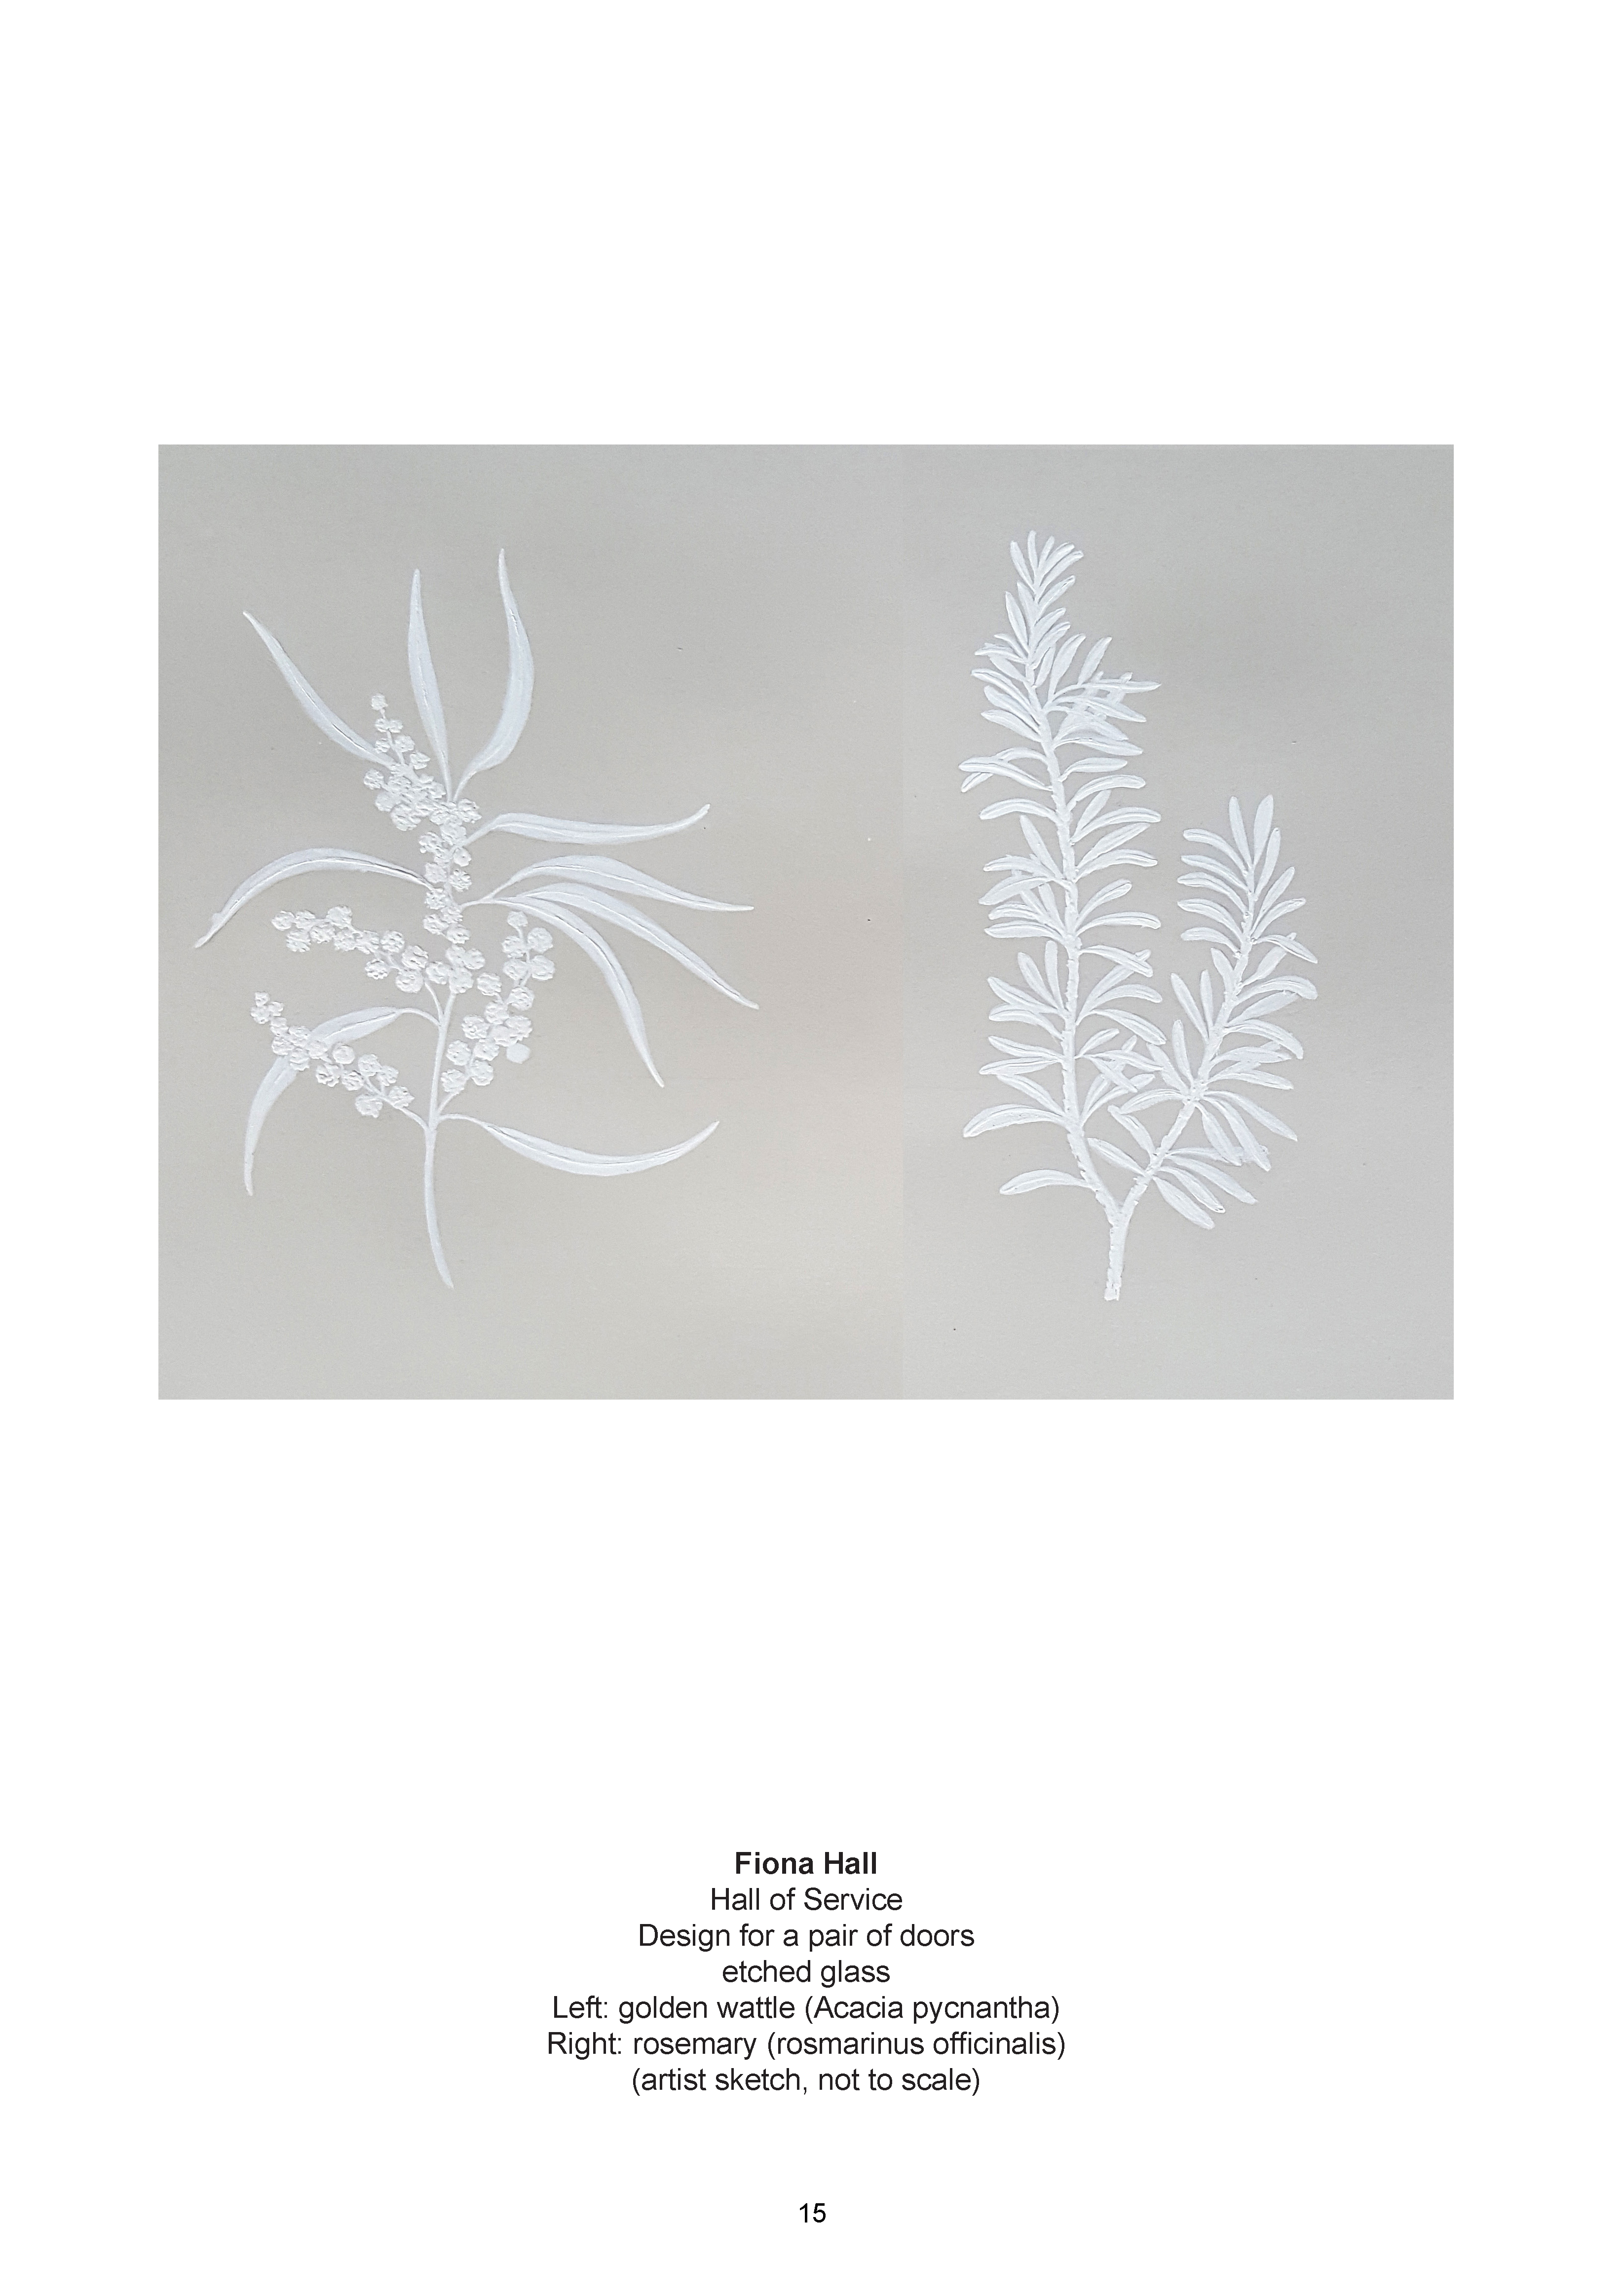 Fiona Hall submission - etched glass door design with wattle and rosemary